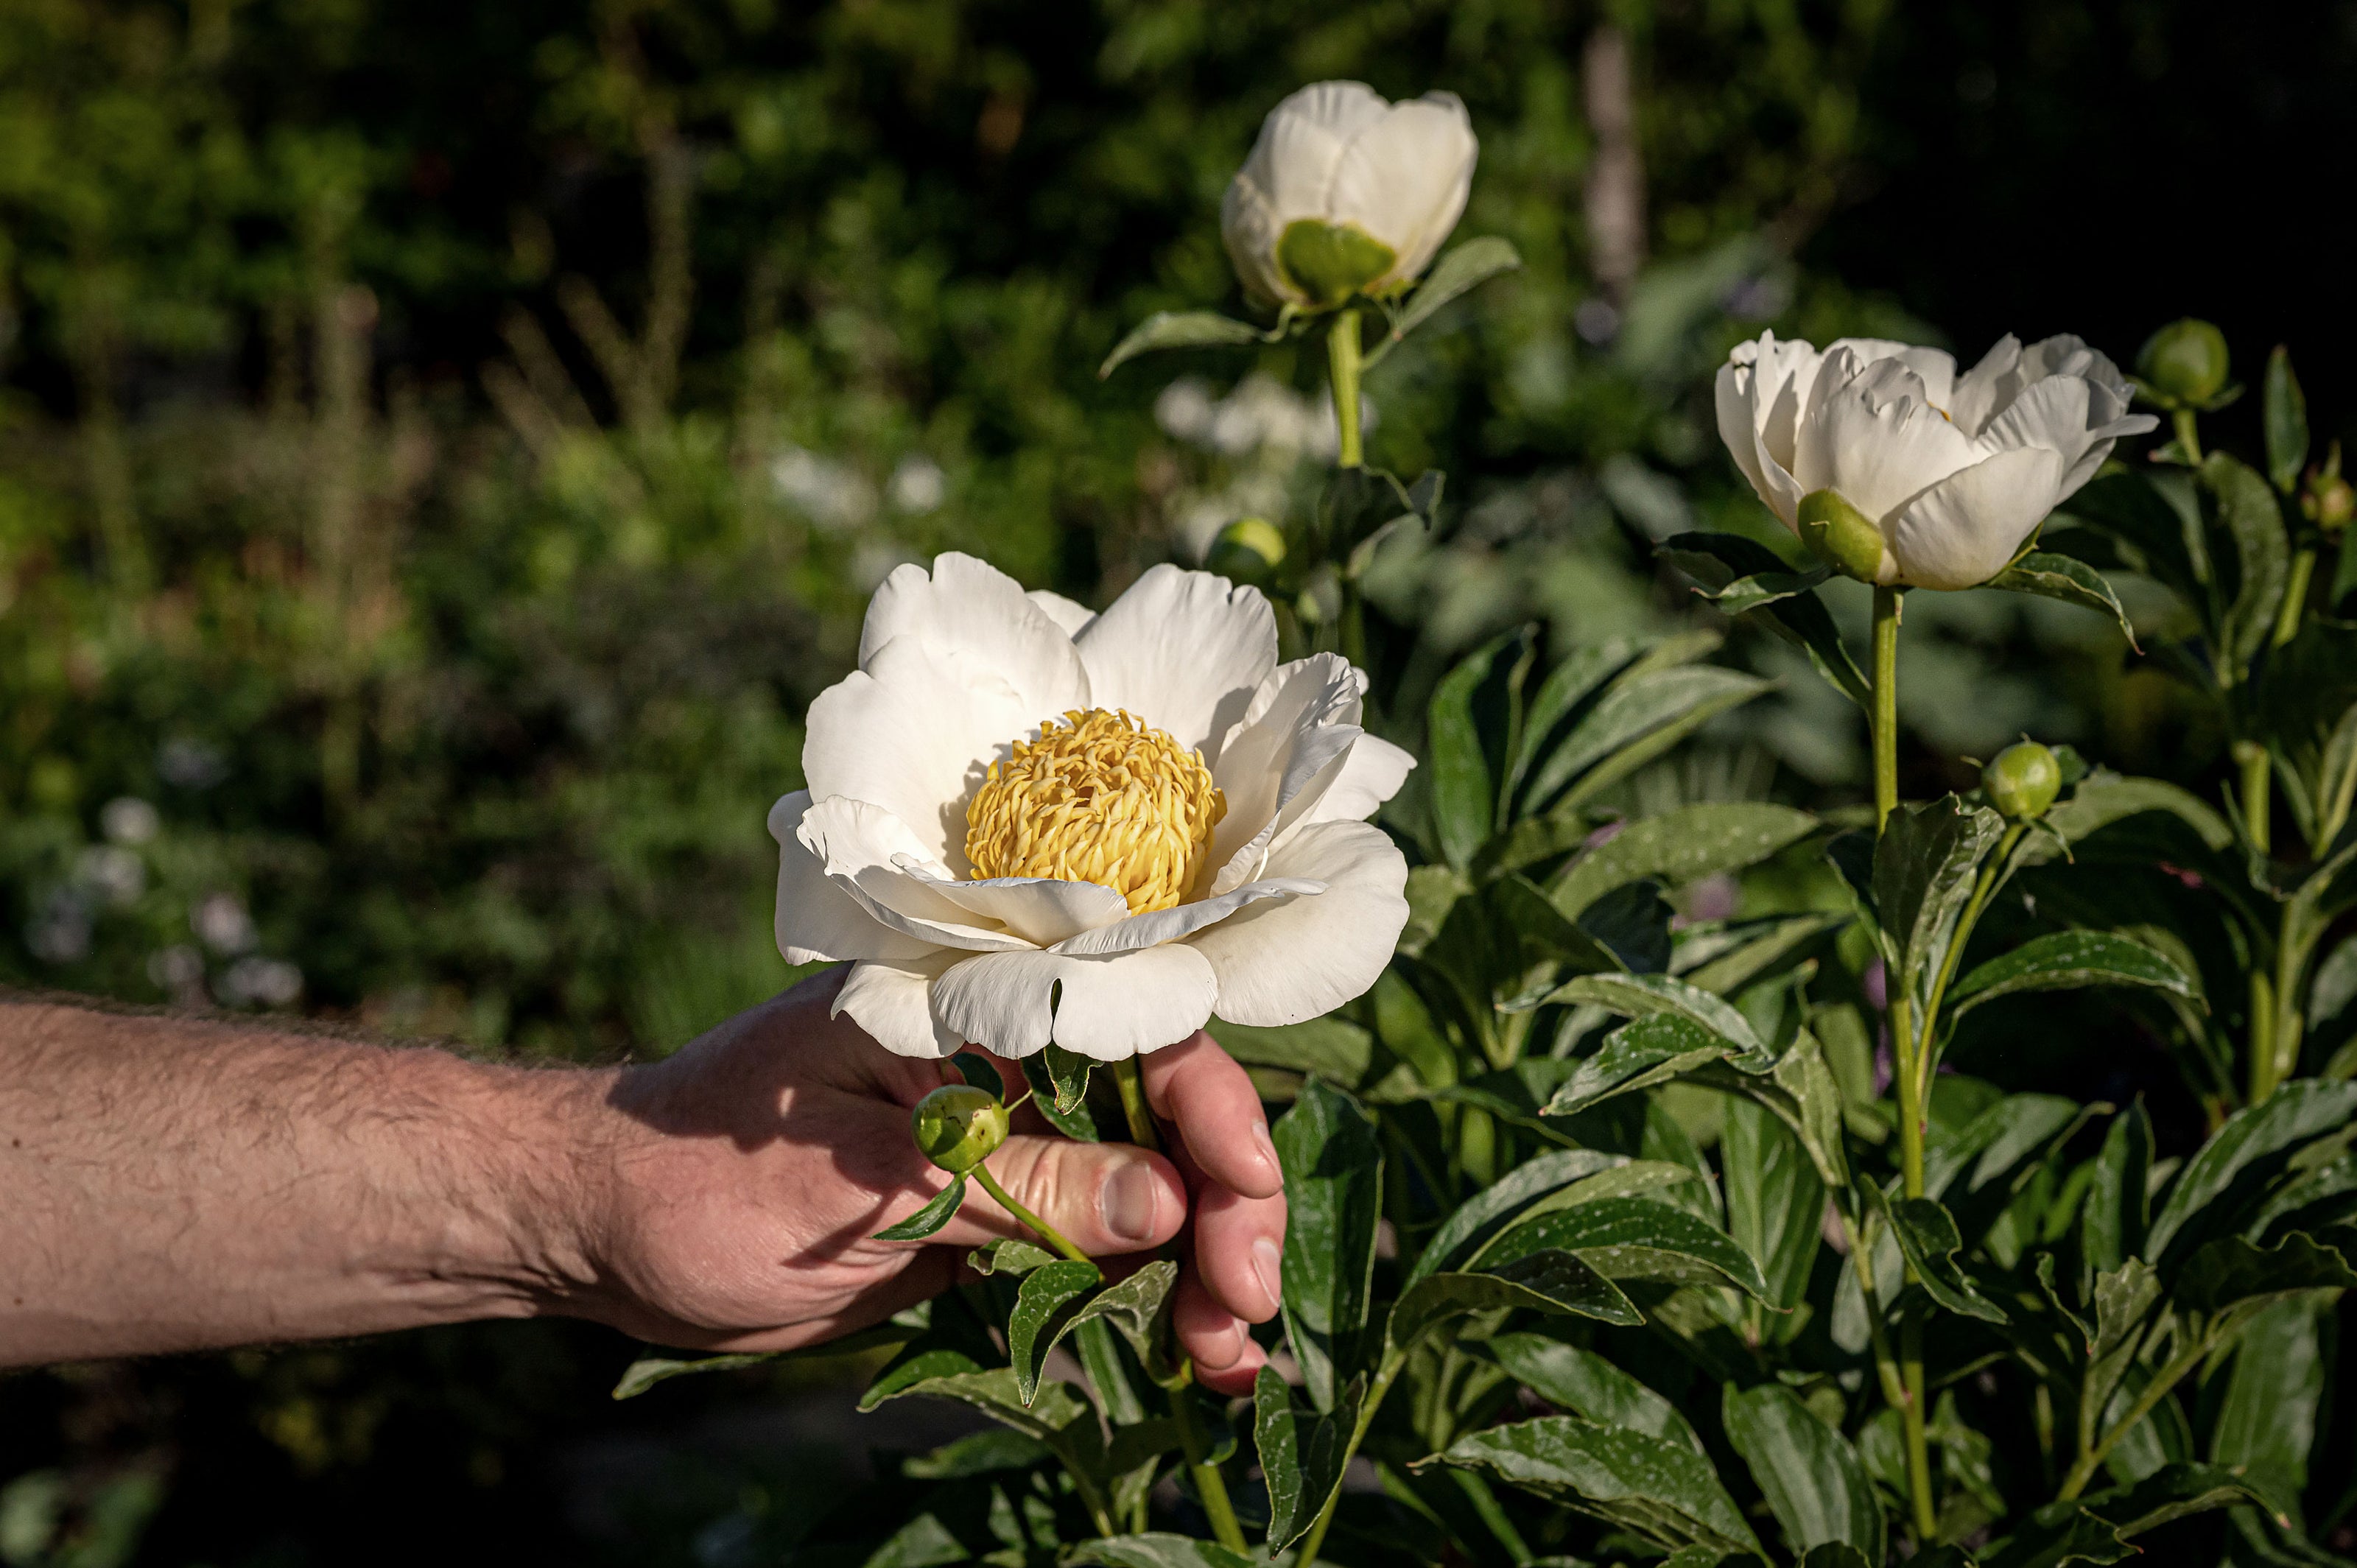 Close-up of hand holding a white peony with large yellow centre.  